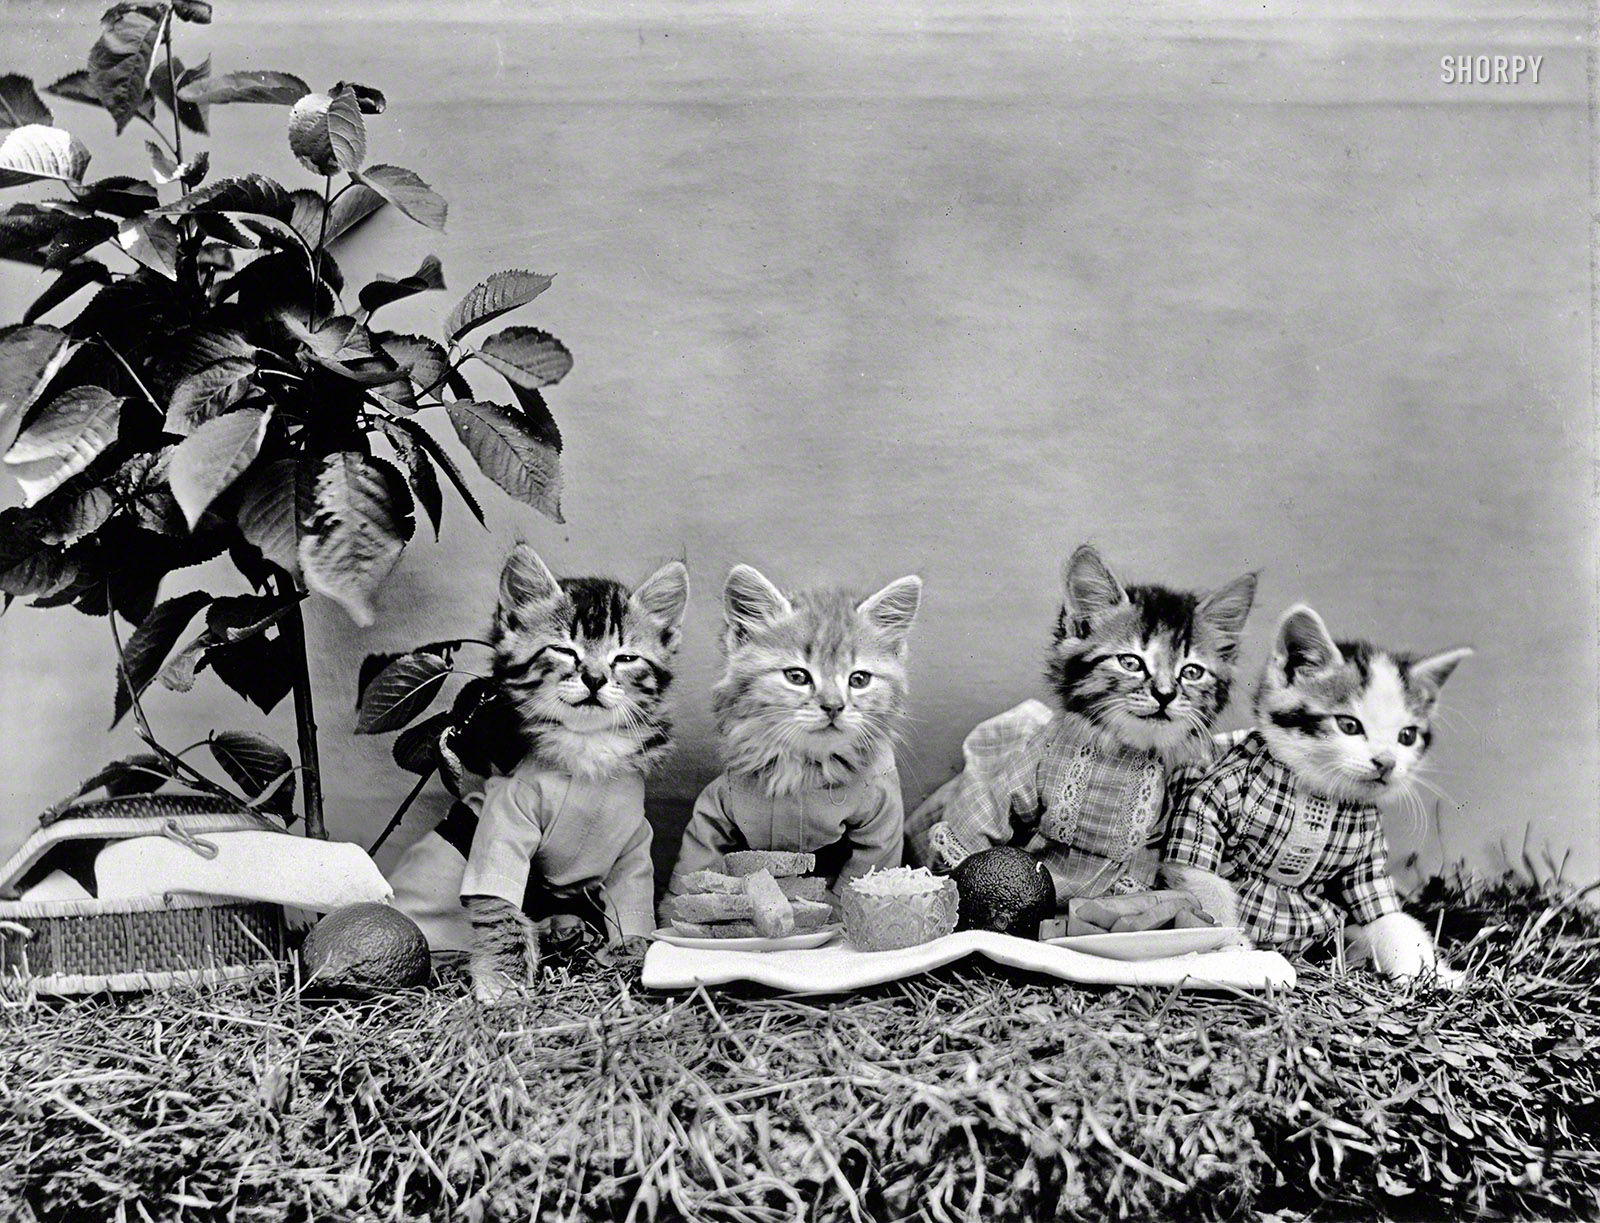 1914. "Kittens in costume at picnic lunch." After we're done eating, stick around for fireworks and the six-legged race! Photo by Harry W. Frees. View full size.